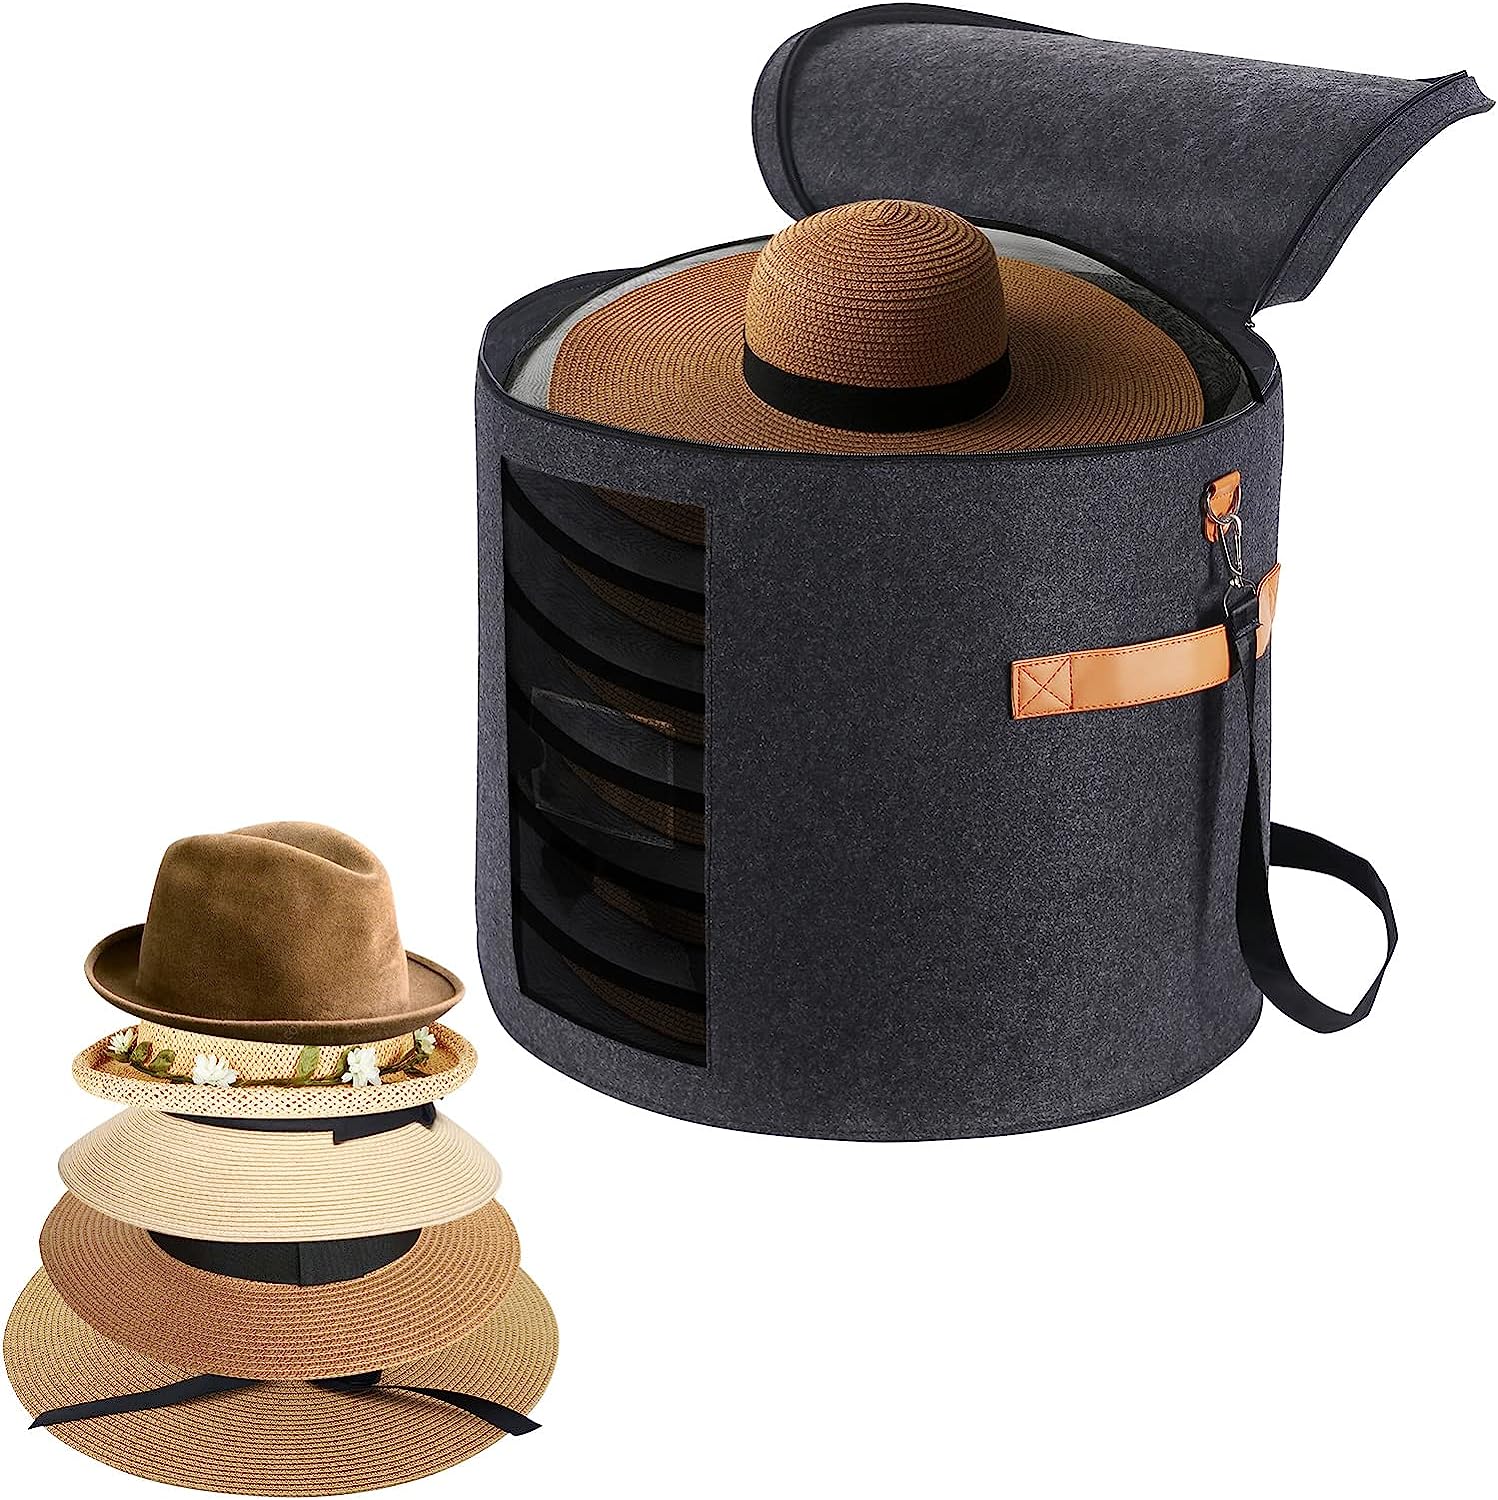  Dynamic Hat Box for Travel and Storage - Collapsible